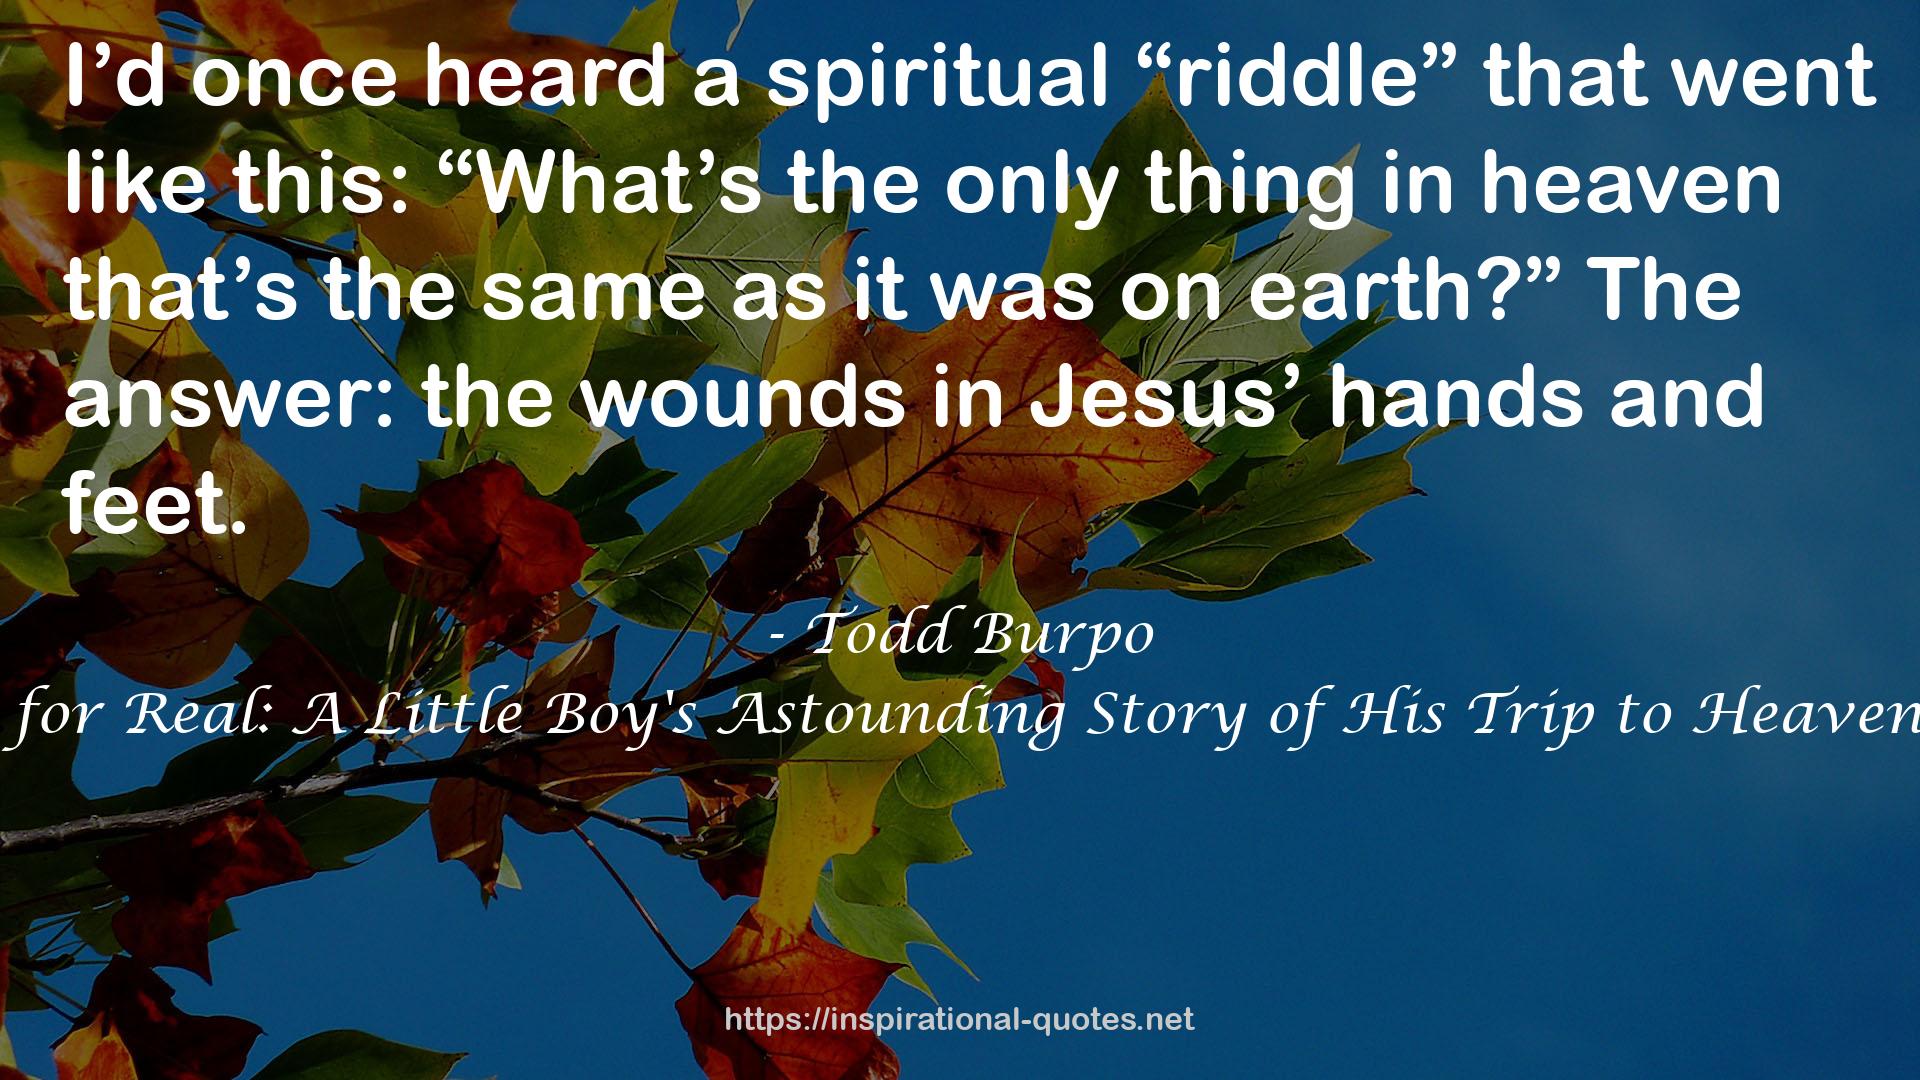 Heaven is for Real: A Little Boy's Astounding Story of His Trip to Heaven and Back QUOTES